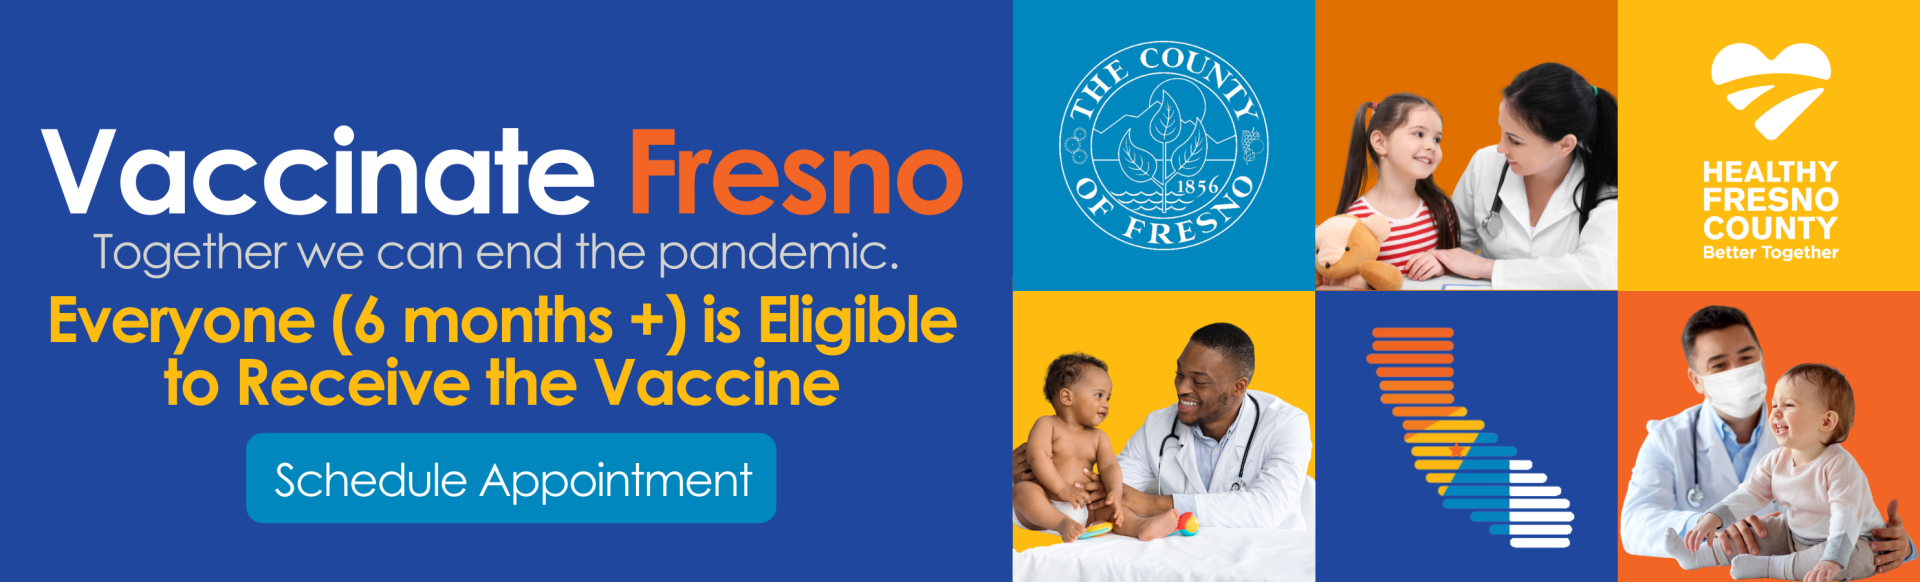 Vaccinate Fresno - Together we can end the pandemic - Everyone 6 months + is eligible for the vaccine